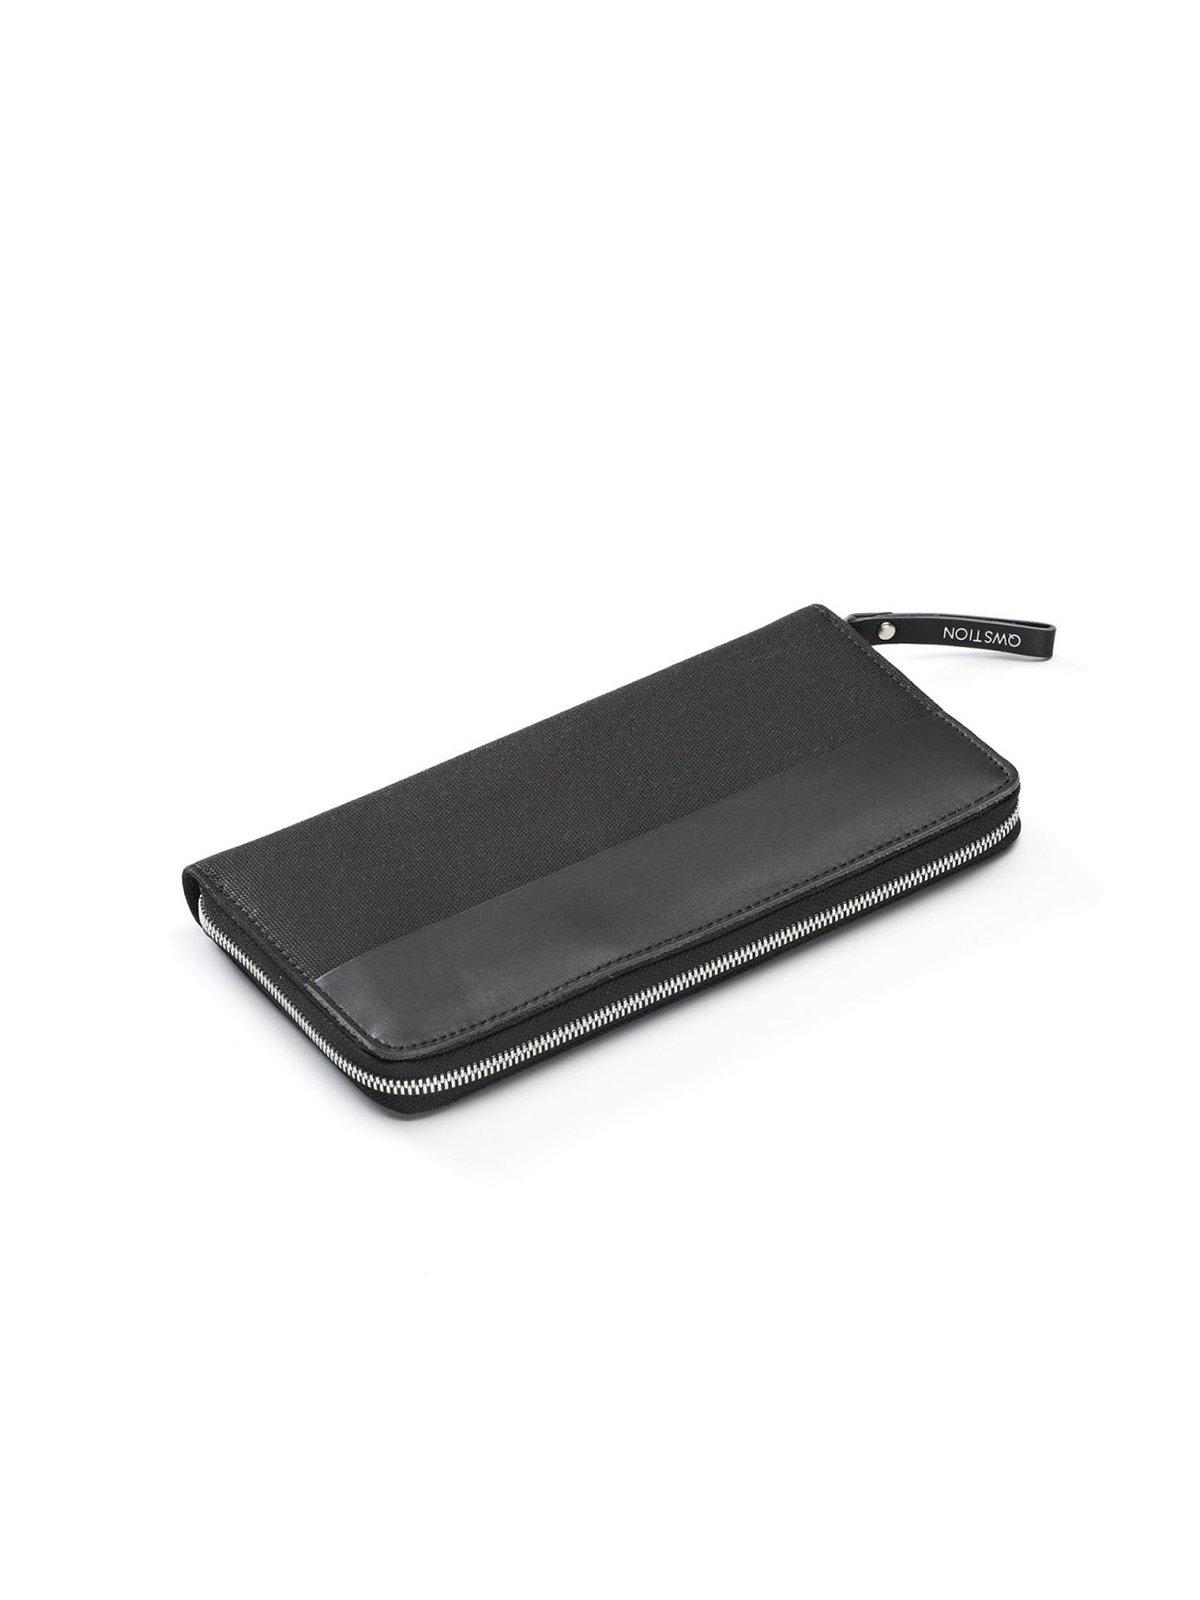 Qwstion Travel Wallet Black Leather - MORE by Morello Indonesia